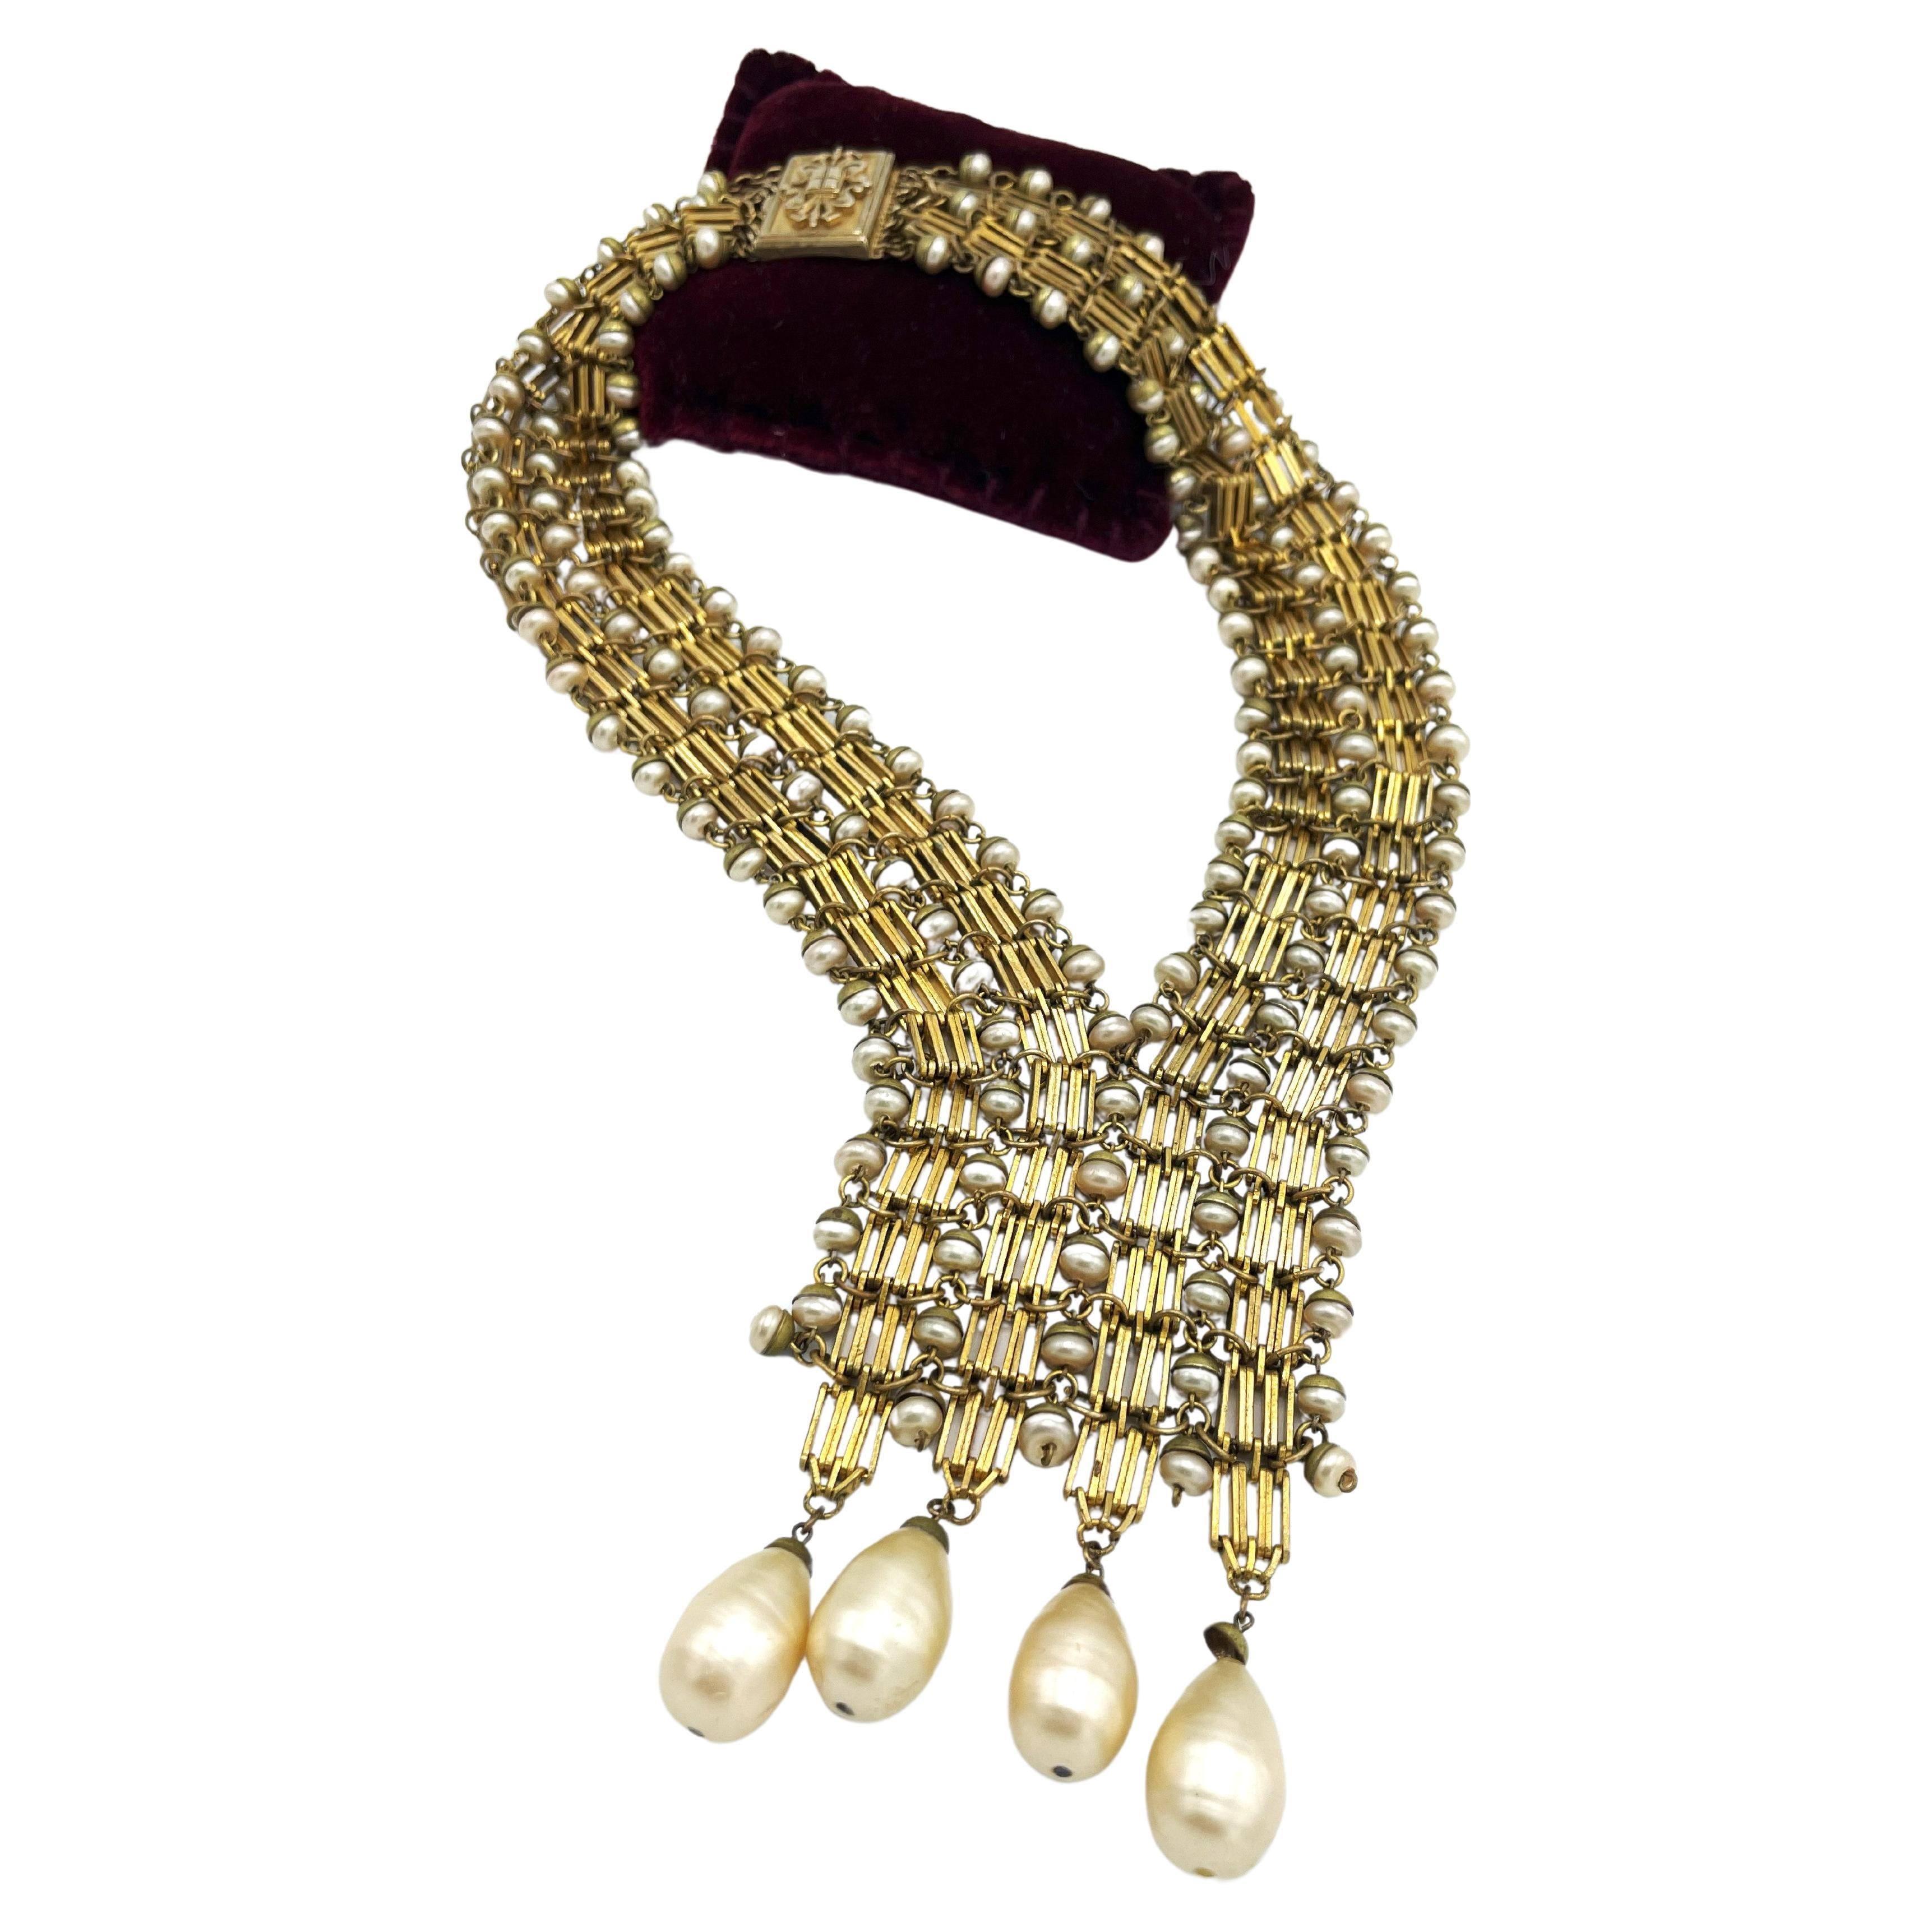  V-SHAPED NECKLACE, early 1940's, gold plated, handmade pearls, Made in France  For Sale